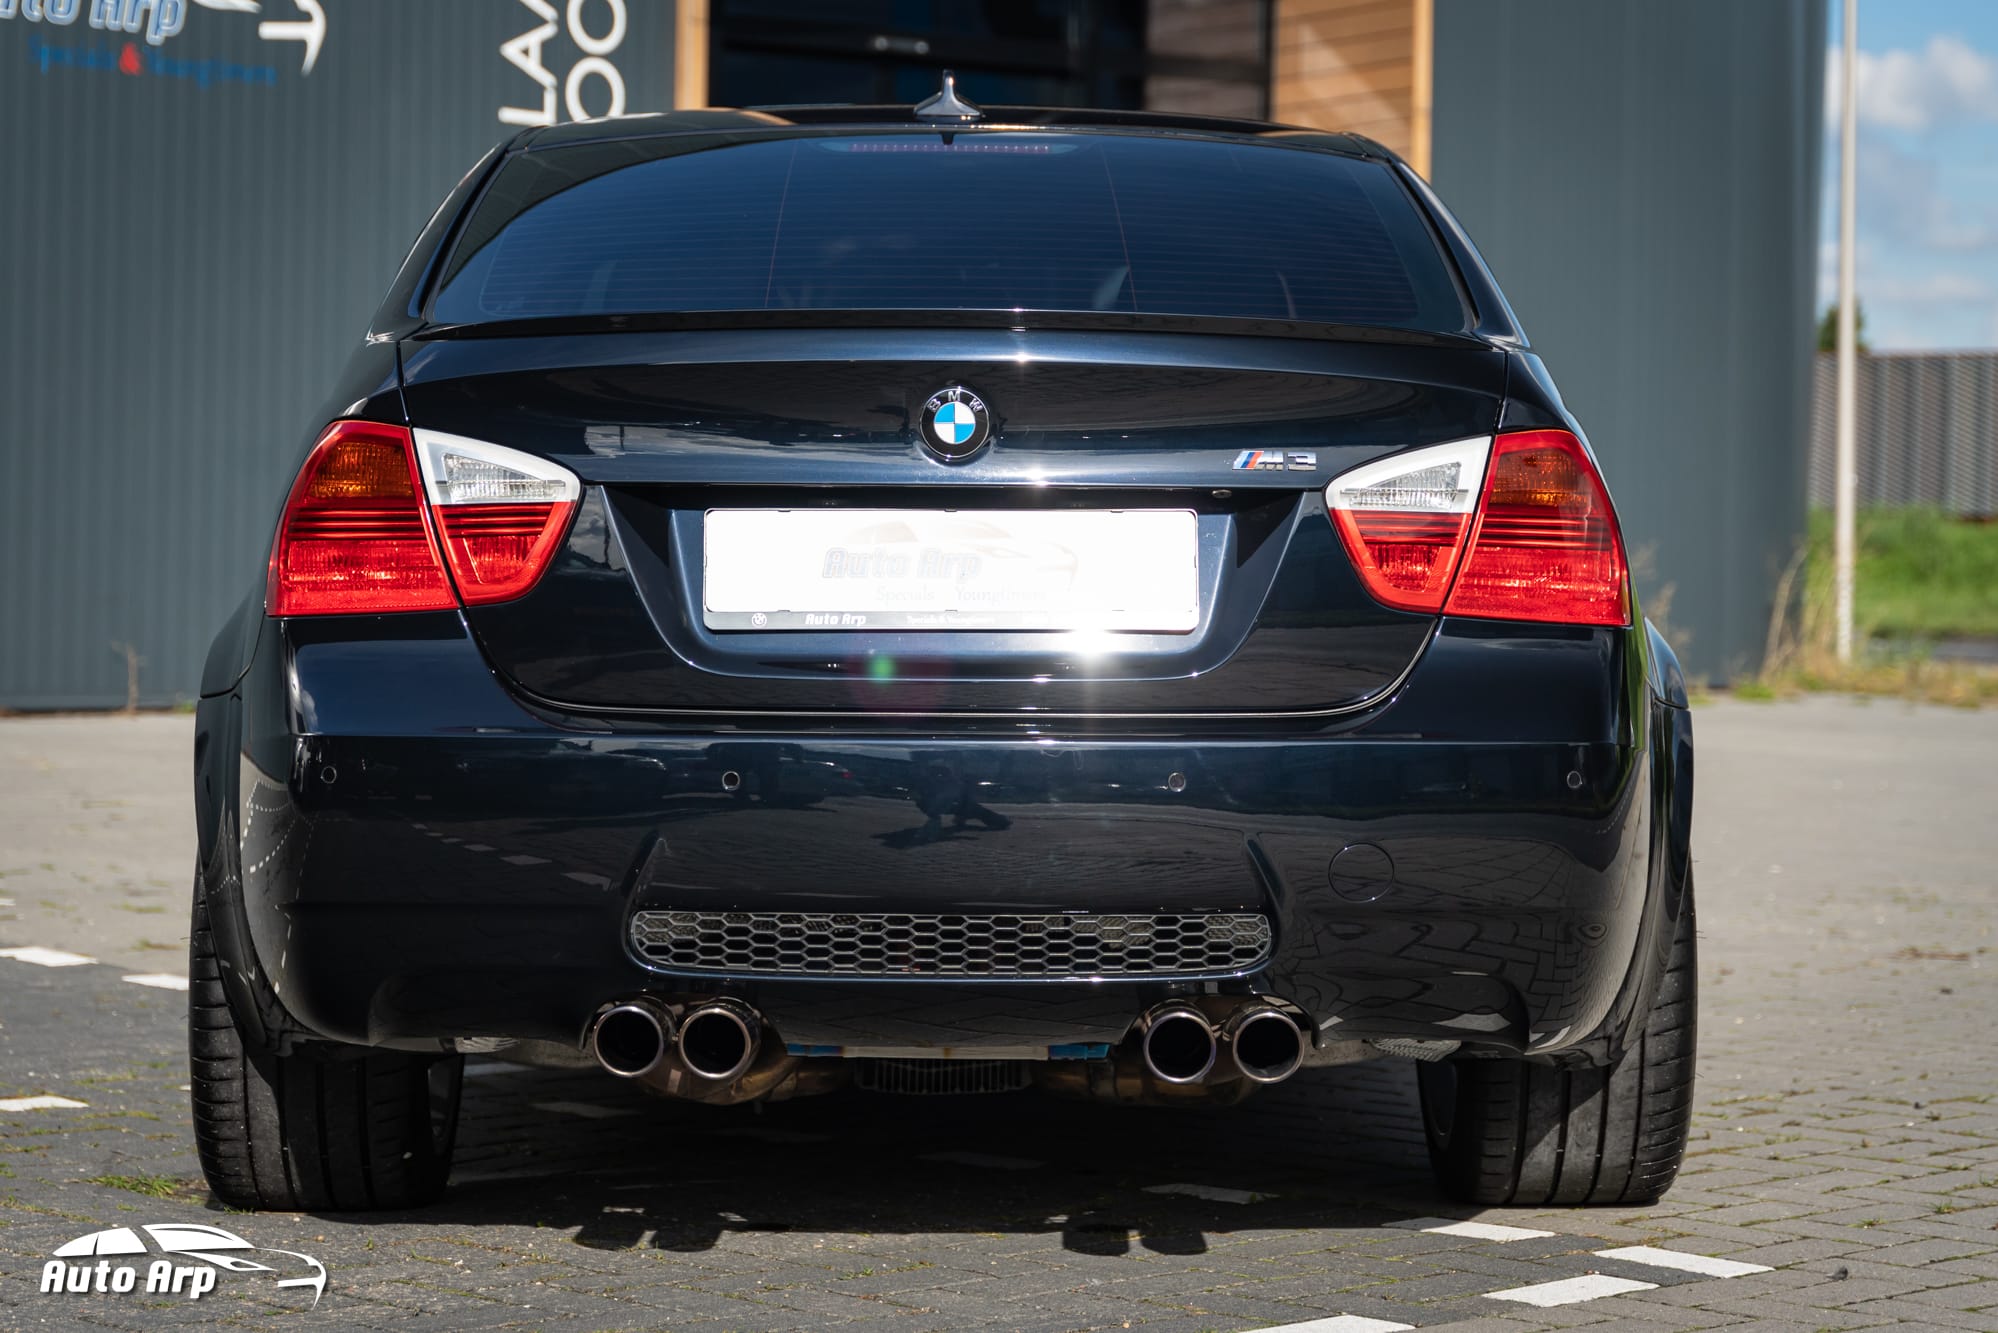 BMW E90 M3 Competition almost youngtimer